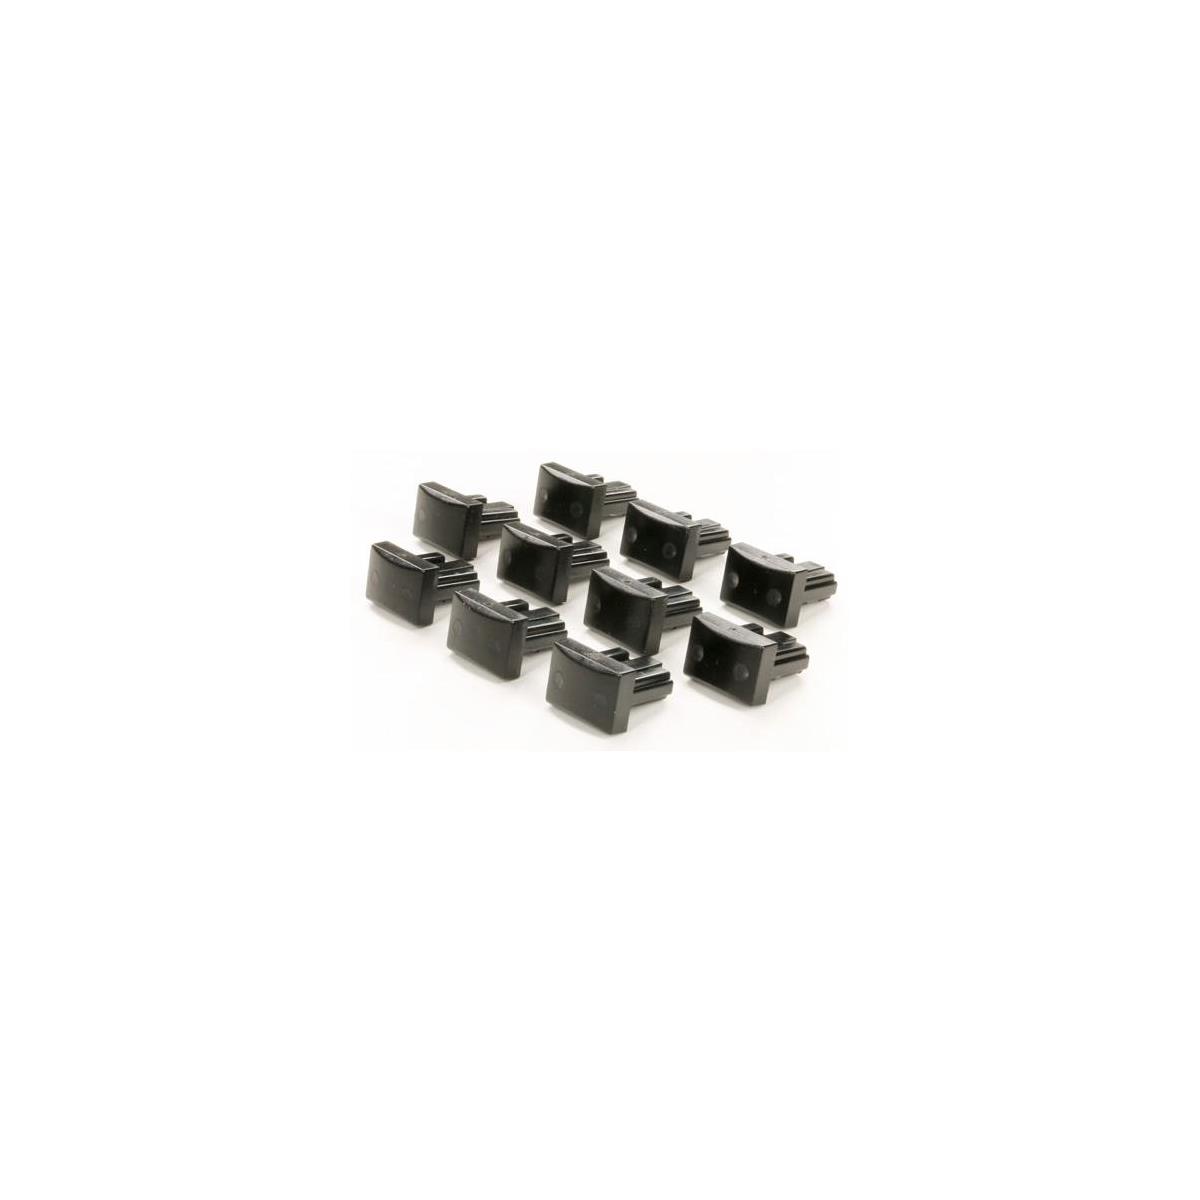 Image of Aviom Key Caps Kit for Personal Mixers and Remote Control Surface